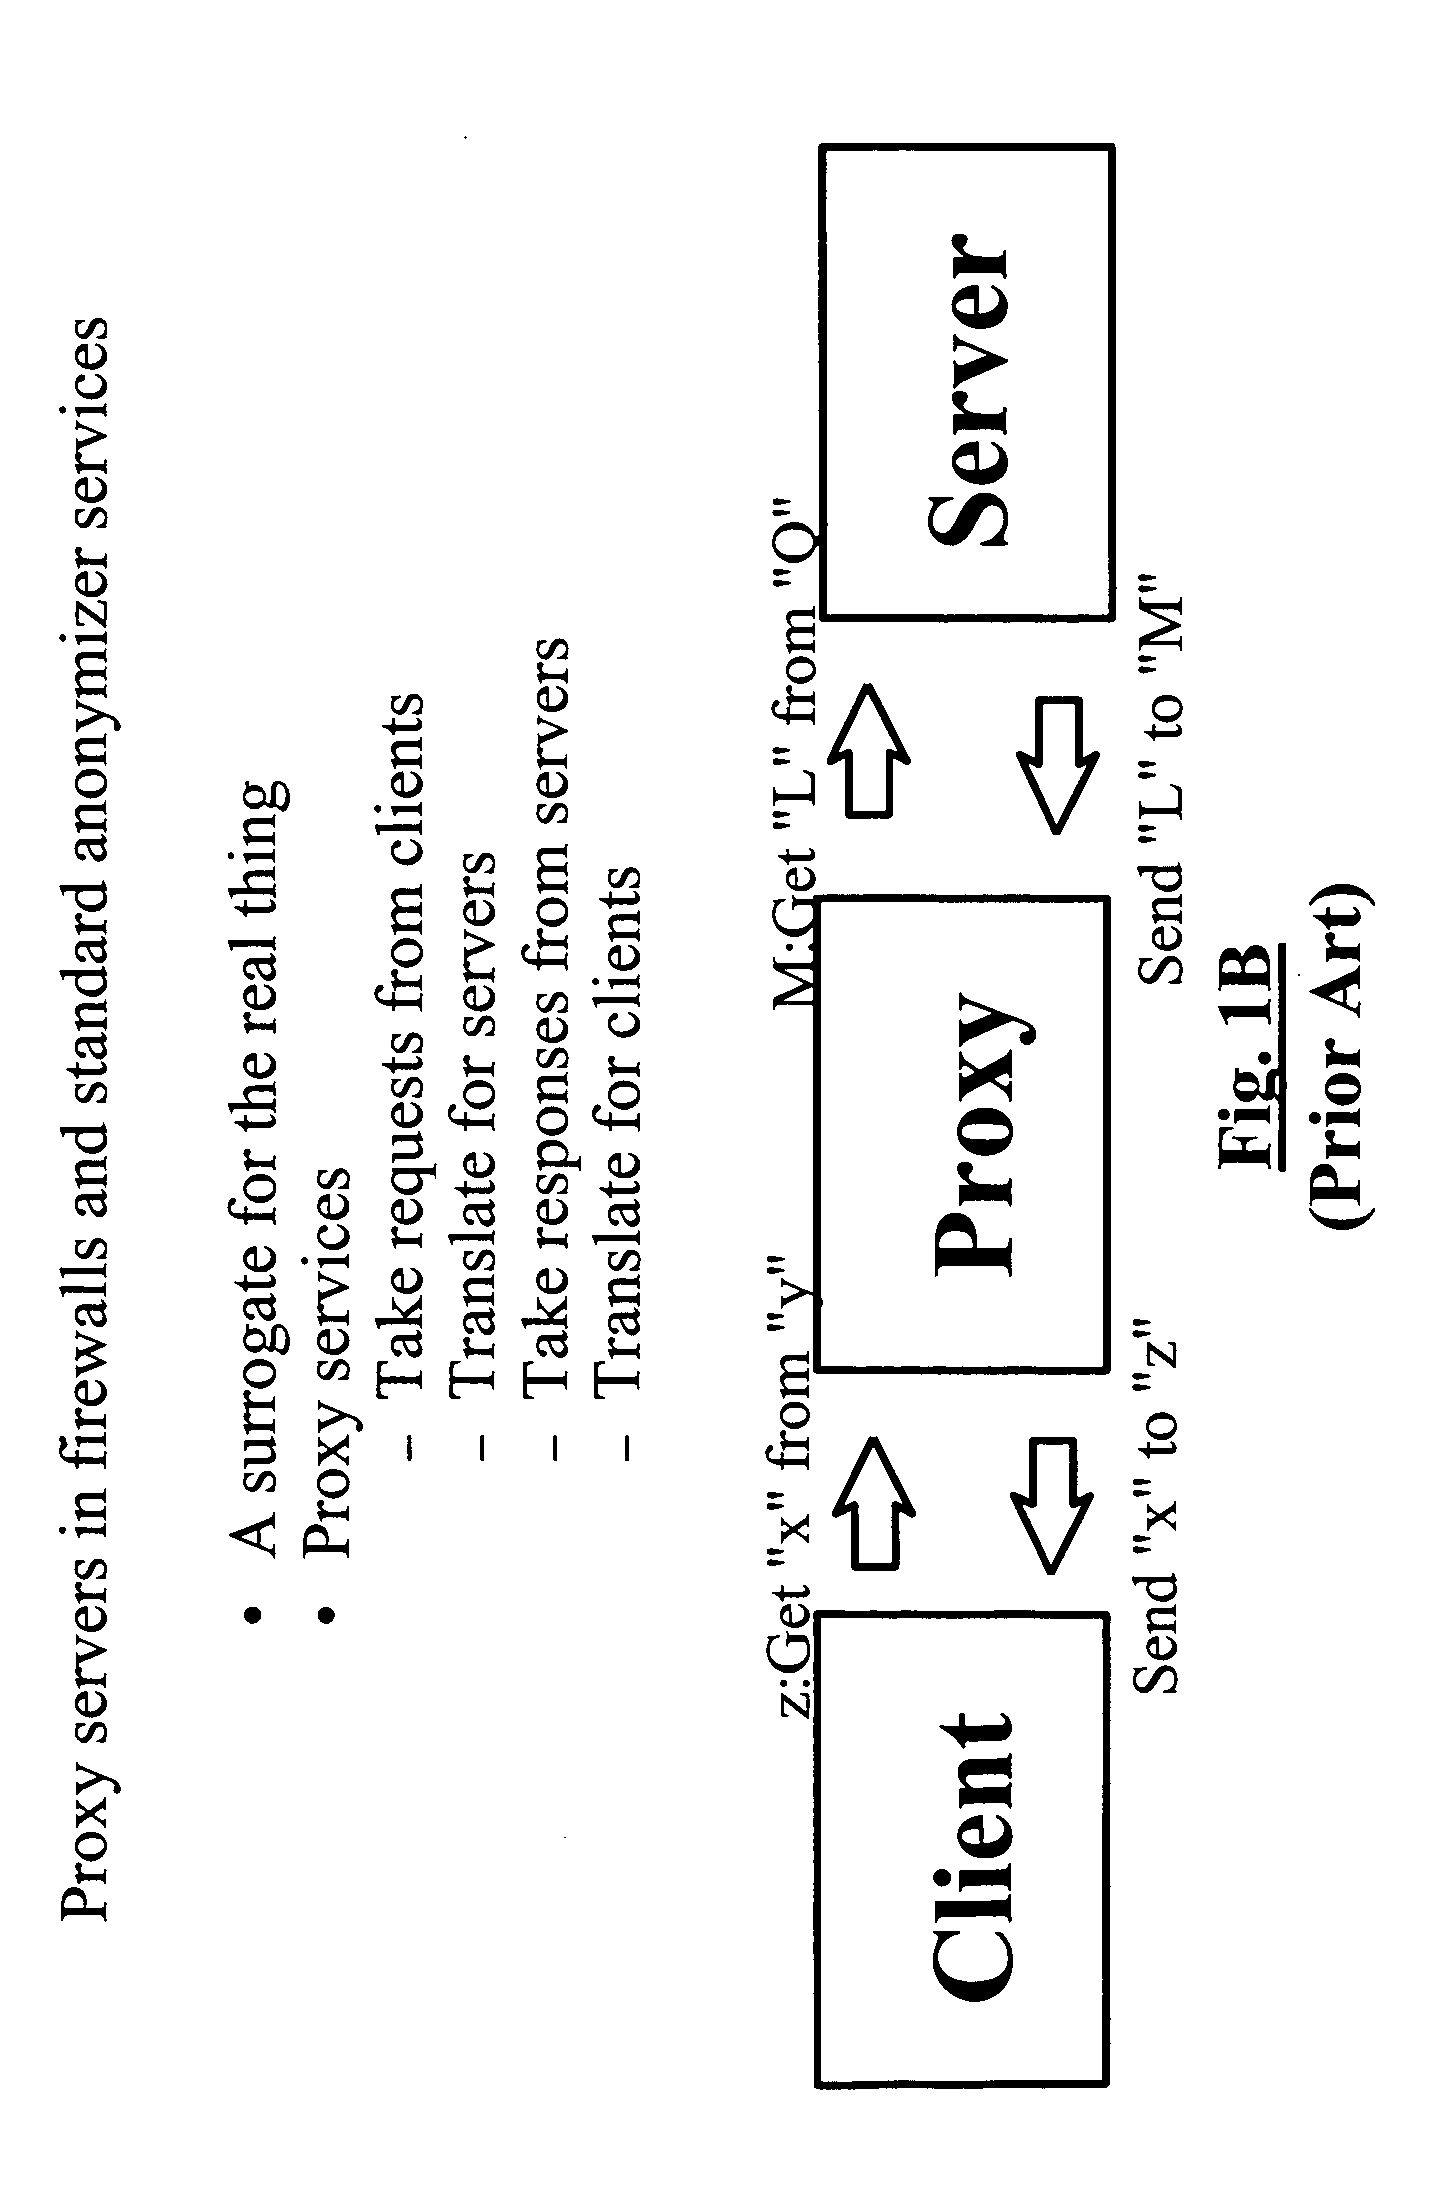 Method and apparatus for network deception/emulation